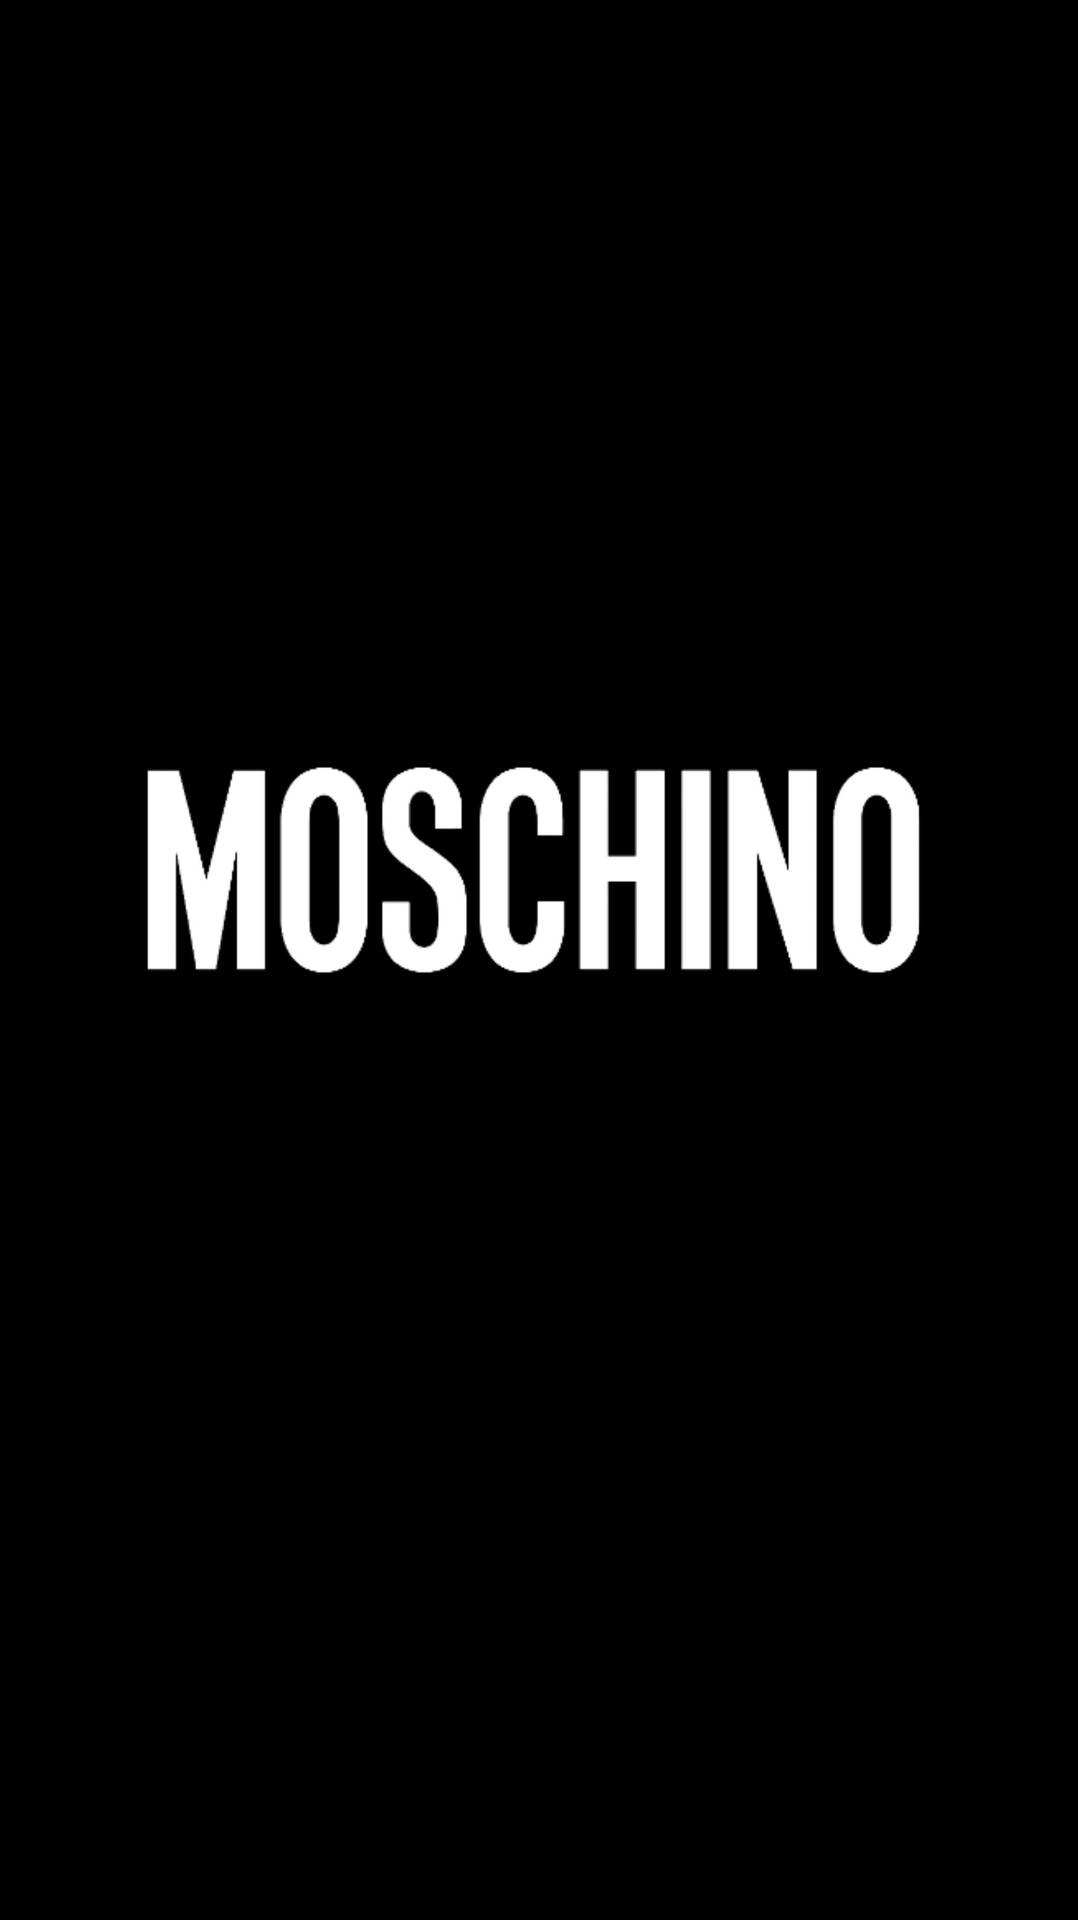 Download Black And White Moschino Wallpaper | Wallpapers.com